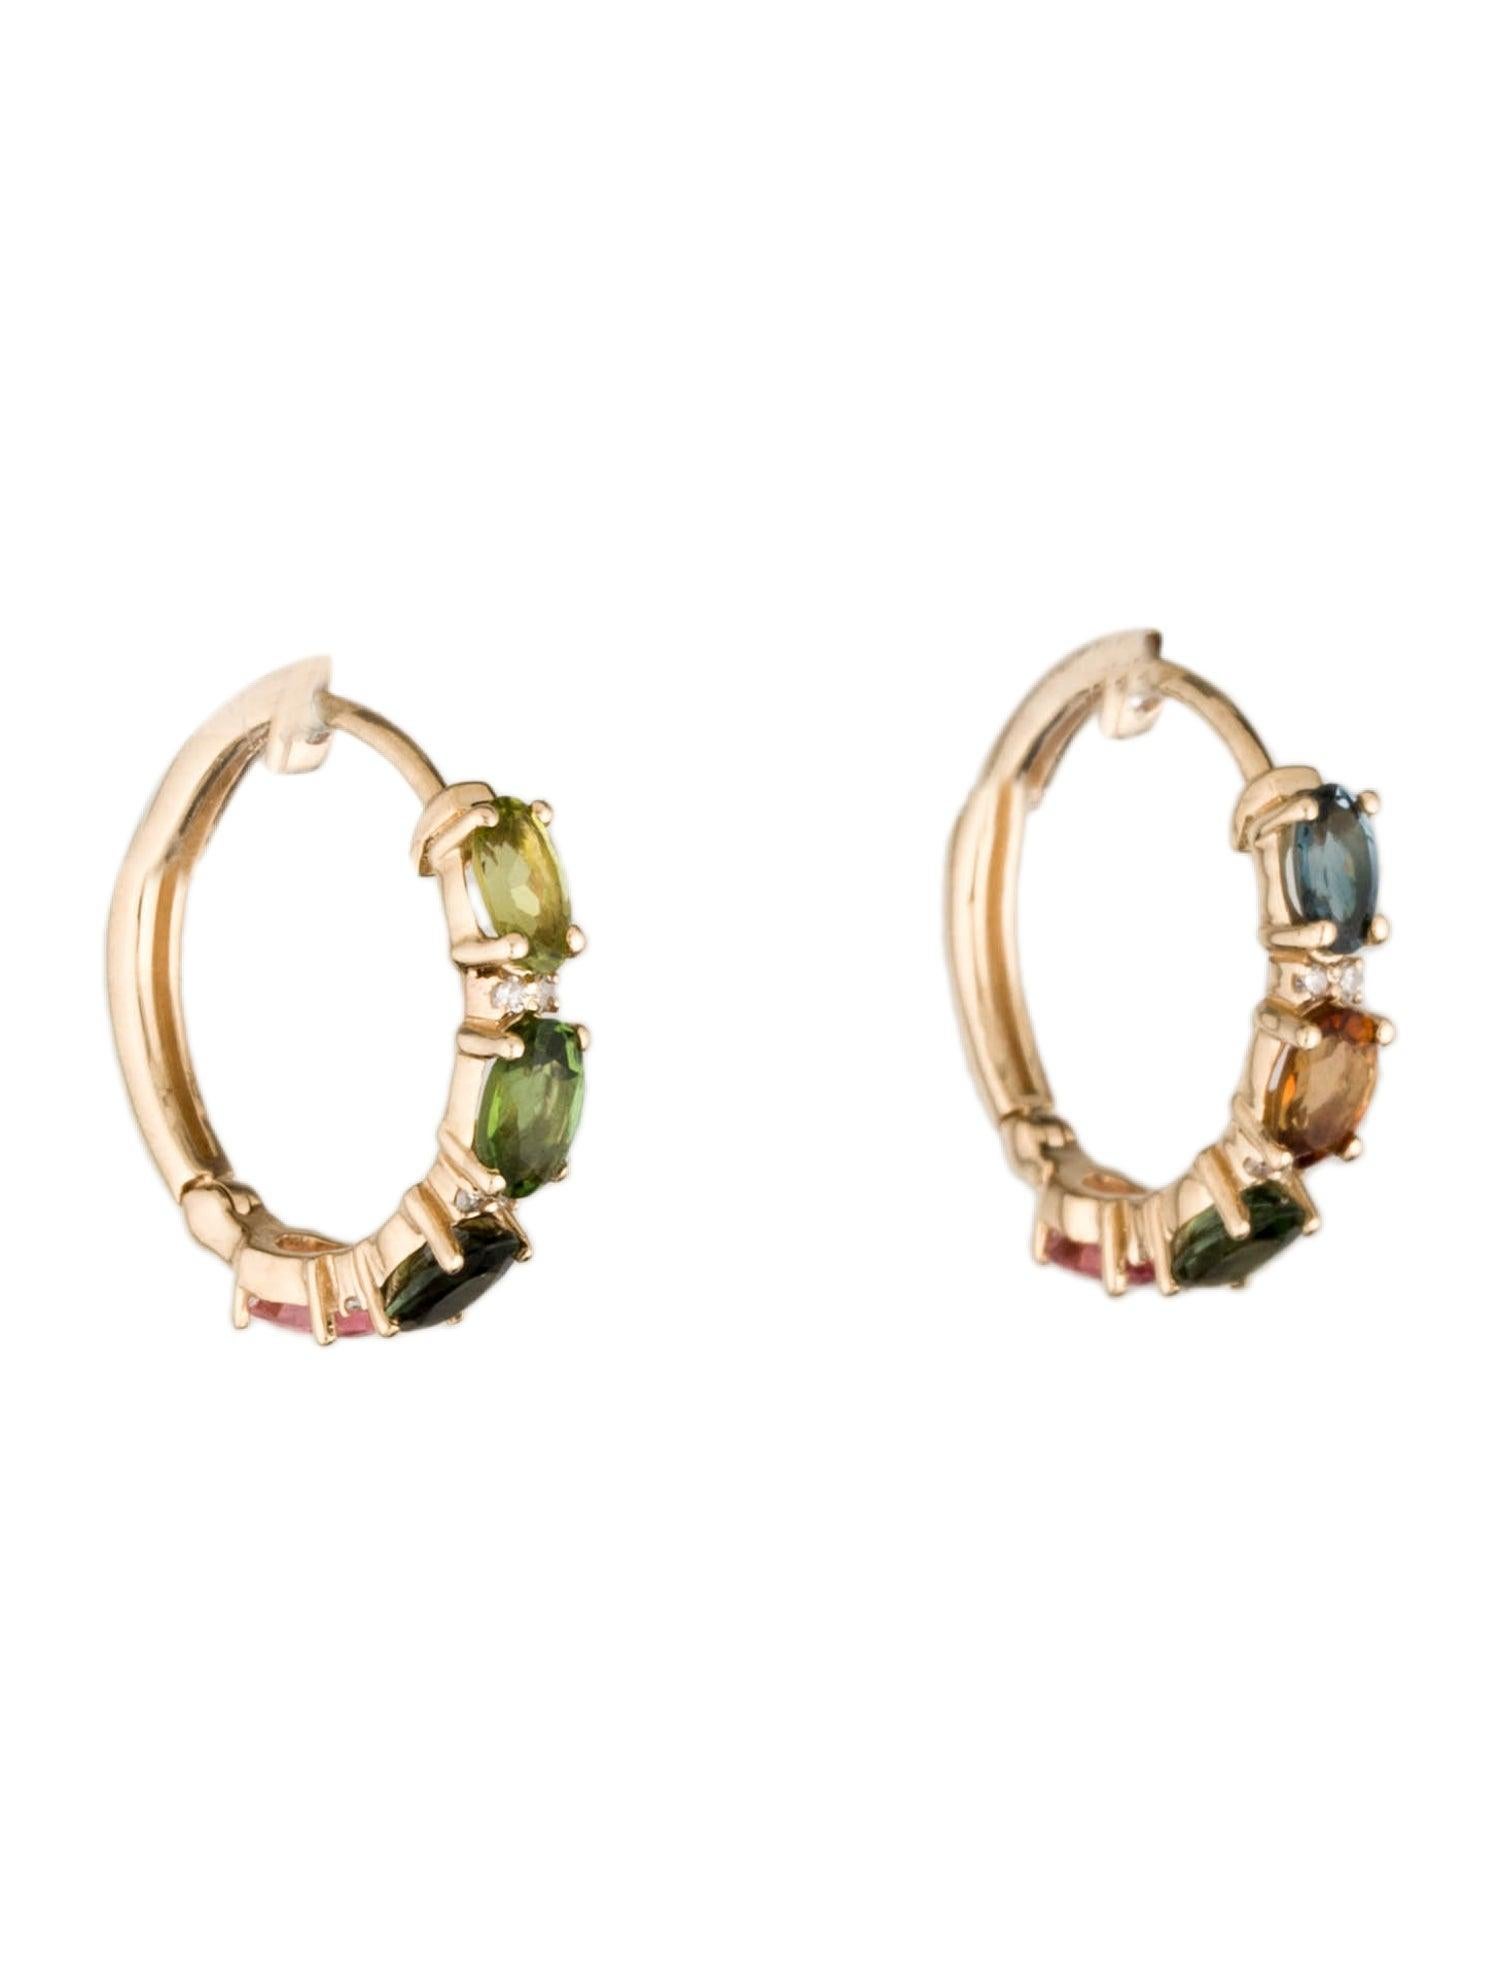 Step into the enchanting world of Rainbow Gemstone Radiance with our exquisite Tourmaline and Diamond Earrings, a dazzling testament to nature's kaleidoscopic beauty. Crafted with precision and passion by Jeweltique, this collection captures the